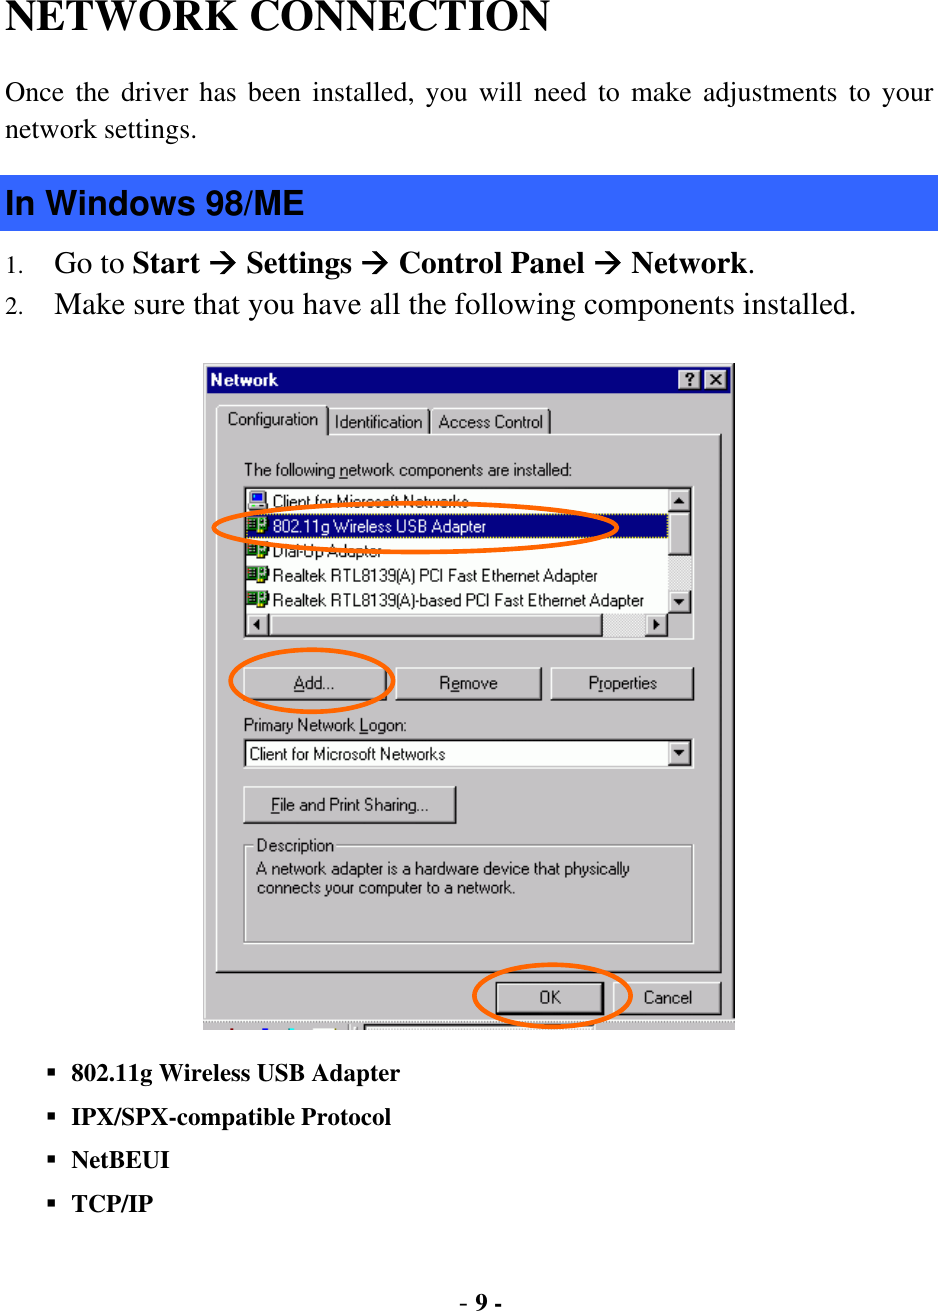  - 9 - NETWORK CONNECTION  Once the driver has been installed, you will need to make adjustments to your network settings. In Windows 98/ME 1.  Go to Start  Settings  Control Panel  Network. 2.  Make sure that you have all the following components installed.    802.11g Wireless USB Adapter    IPX/SPX-compatible Protocol  NetBEUI  TCP/IP 